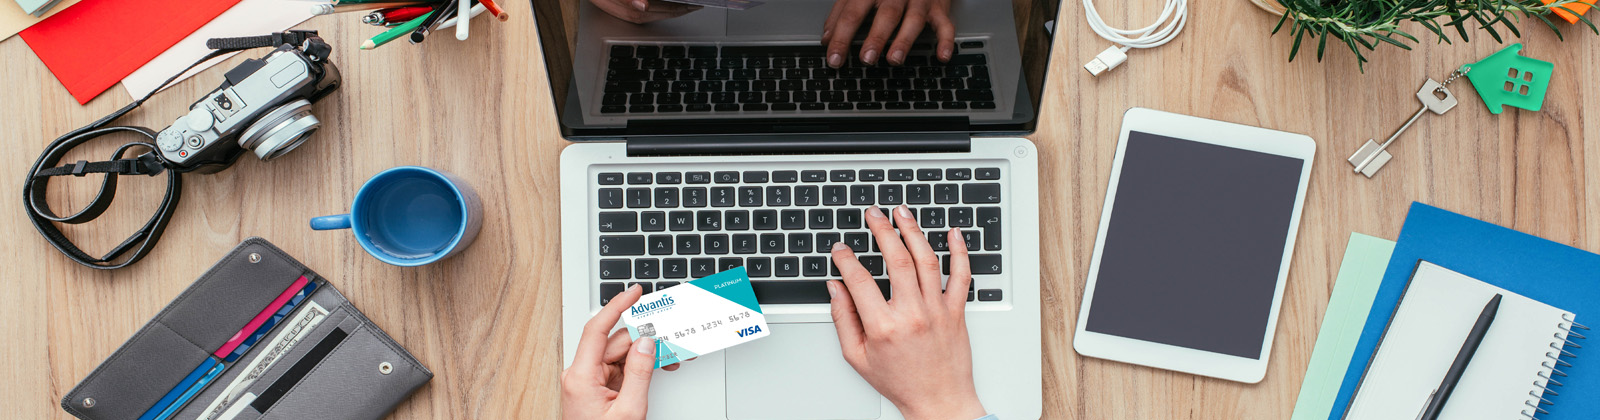 Person holding credit card while using laptop